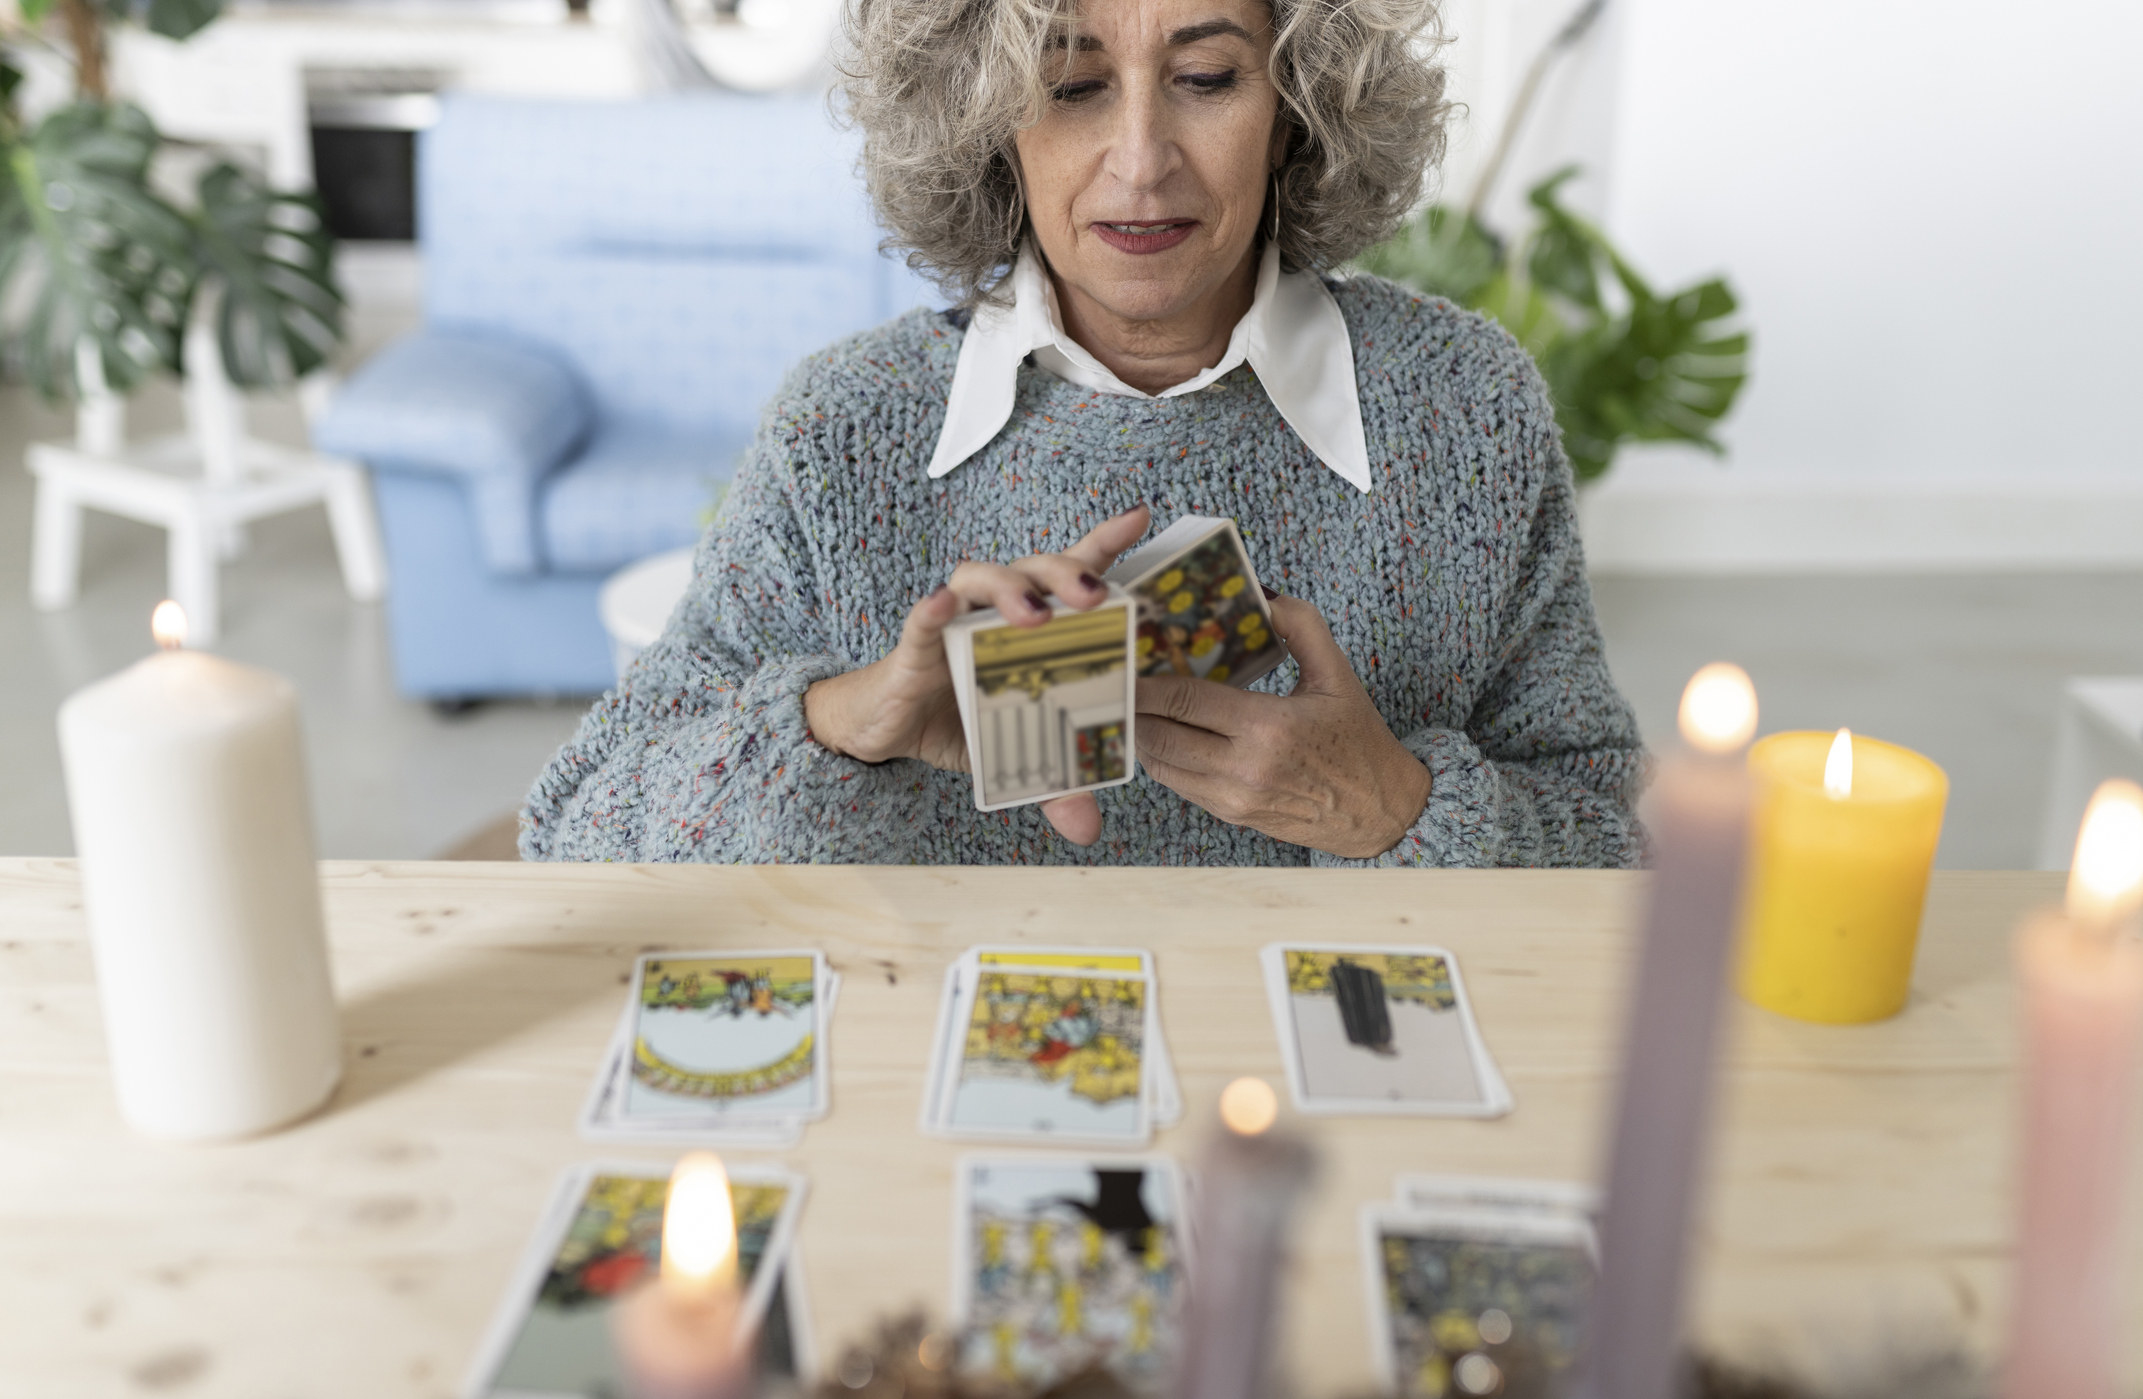 A person shuffling some tarot cards during a reading